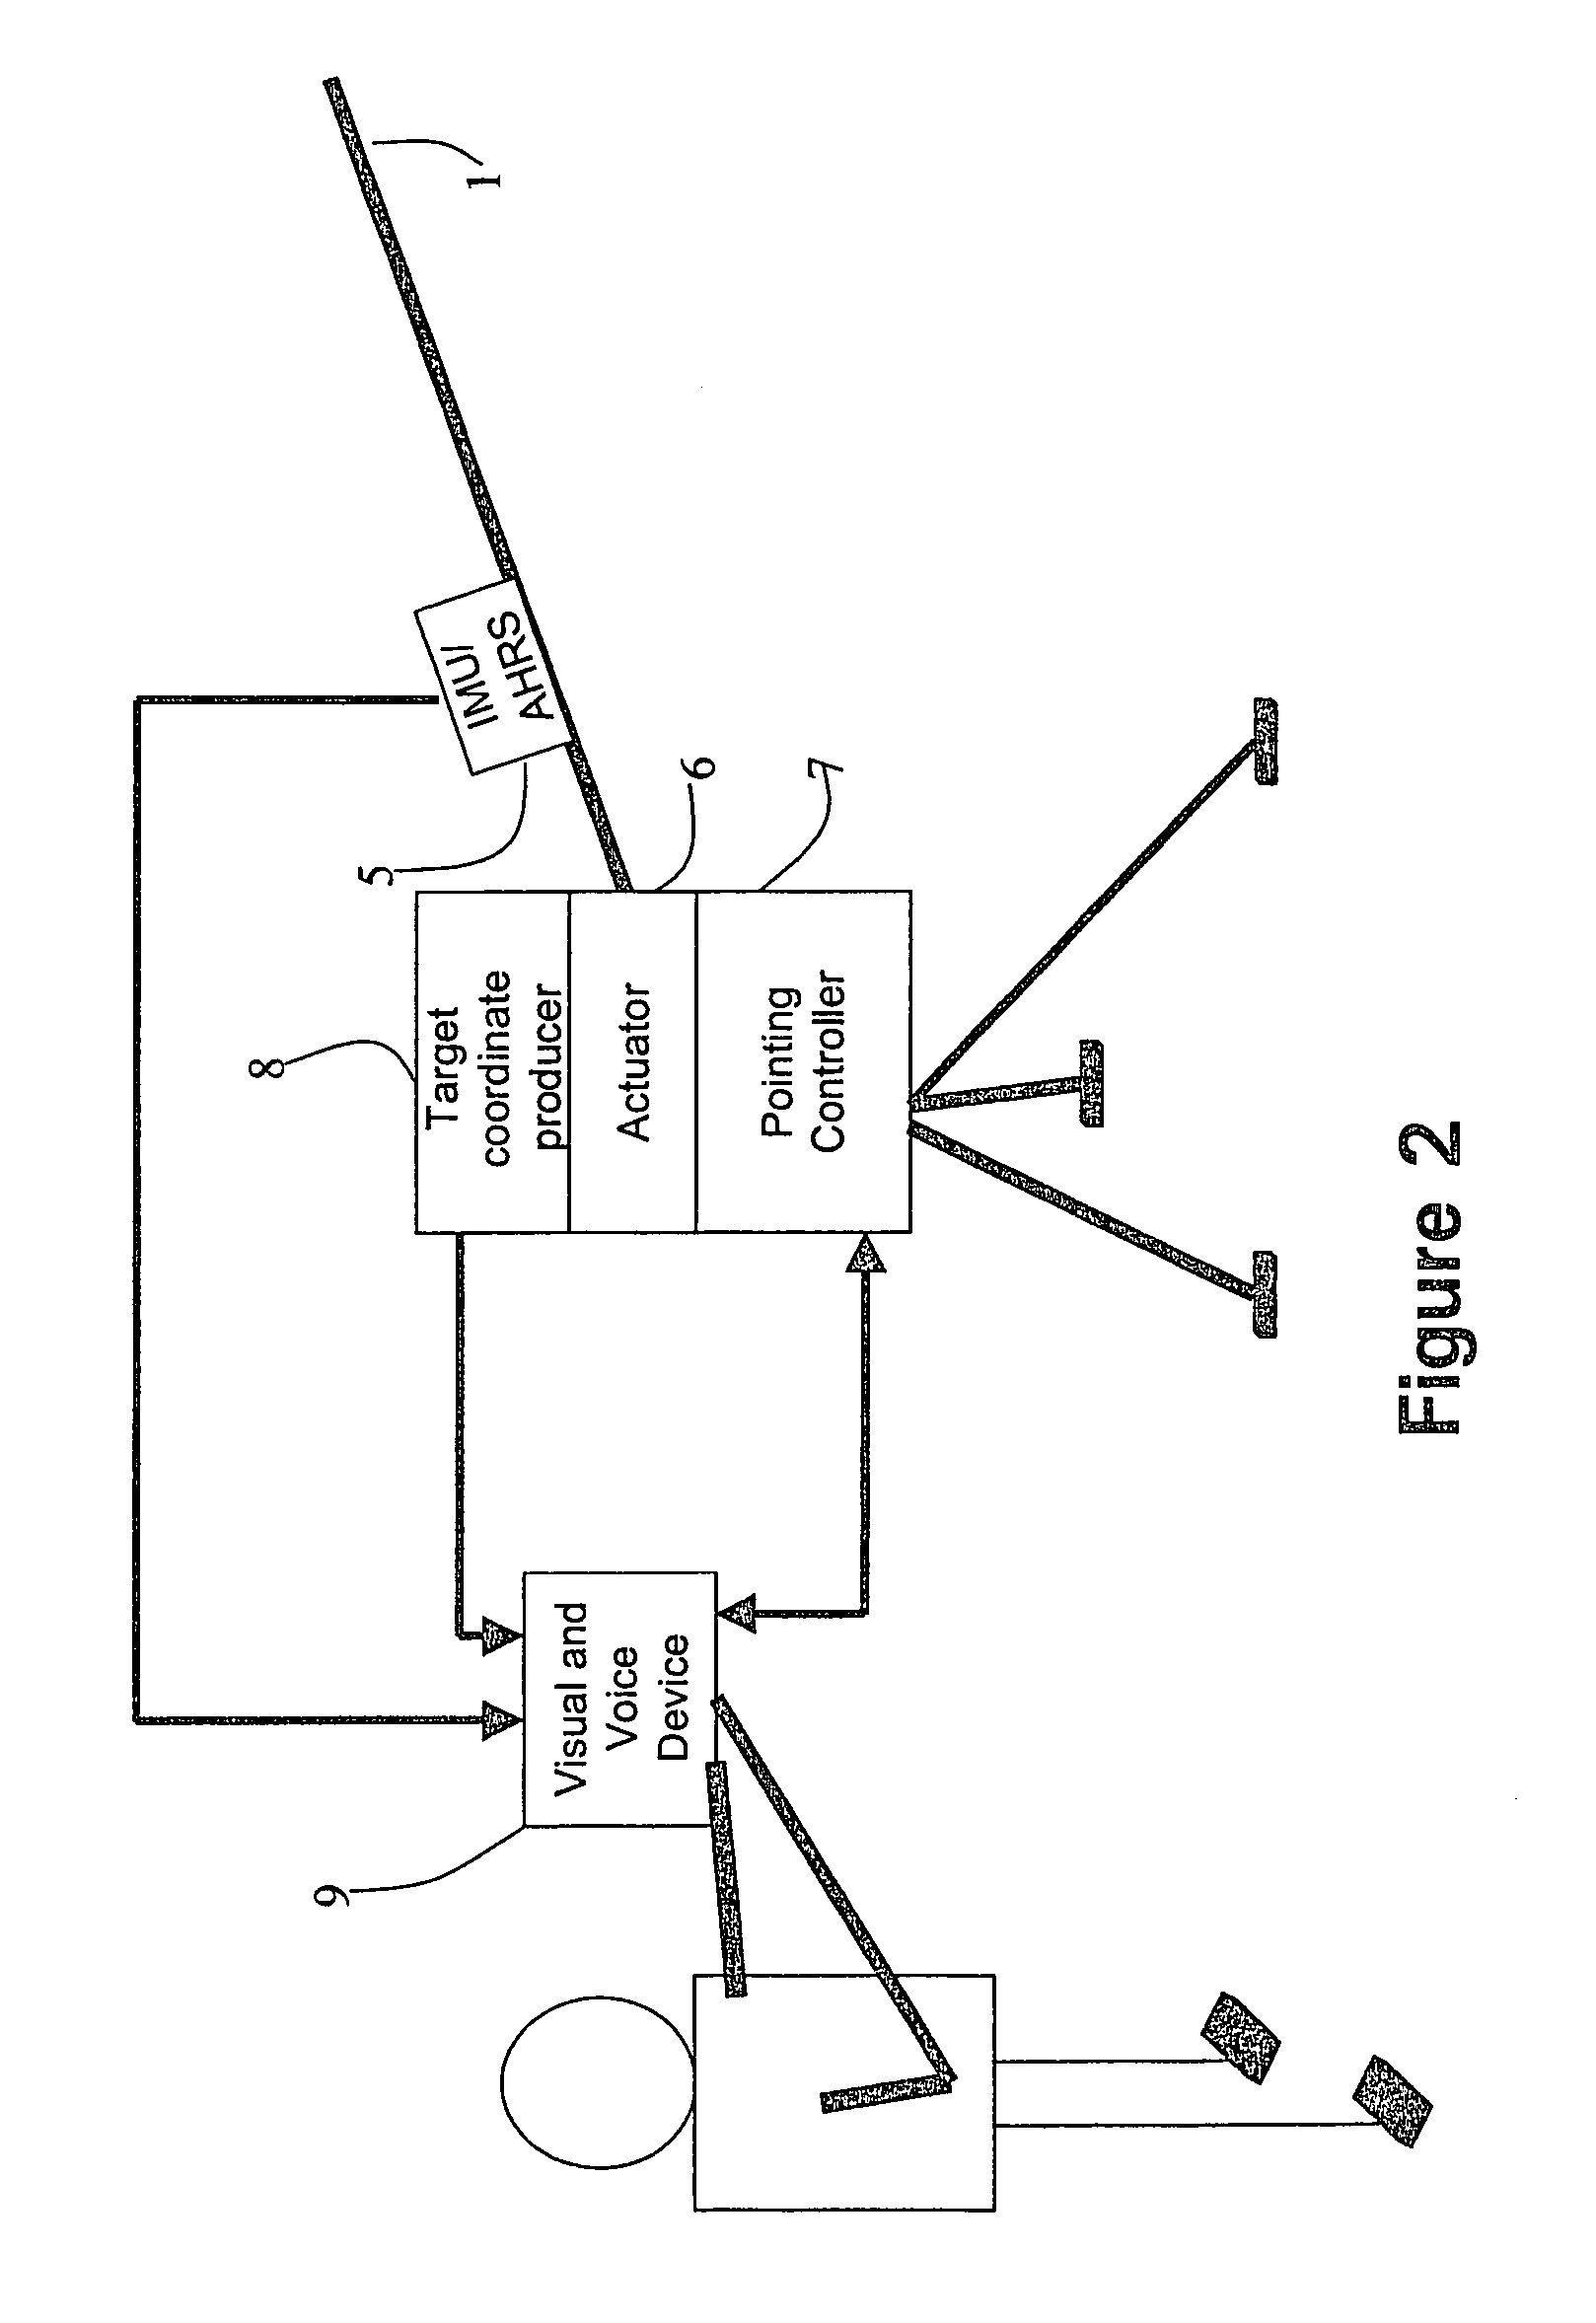 Method and system for automatic stabilization and pointing control of a device